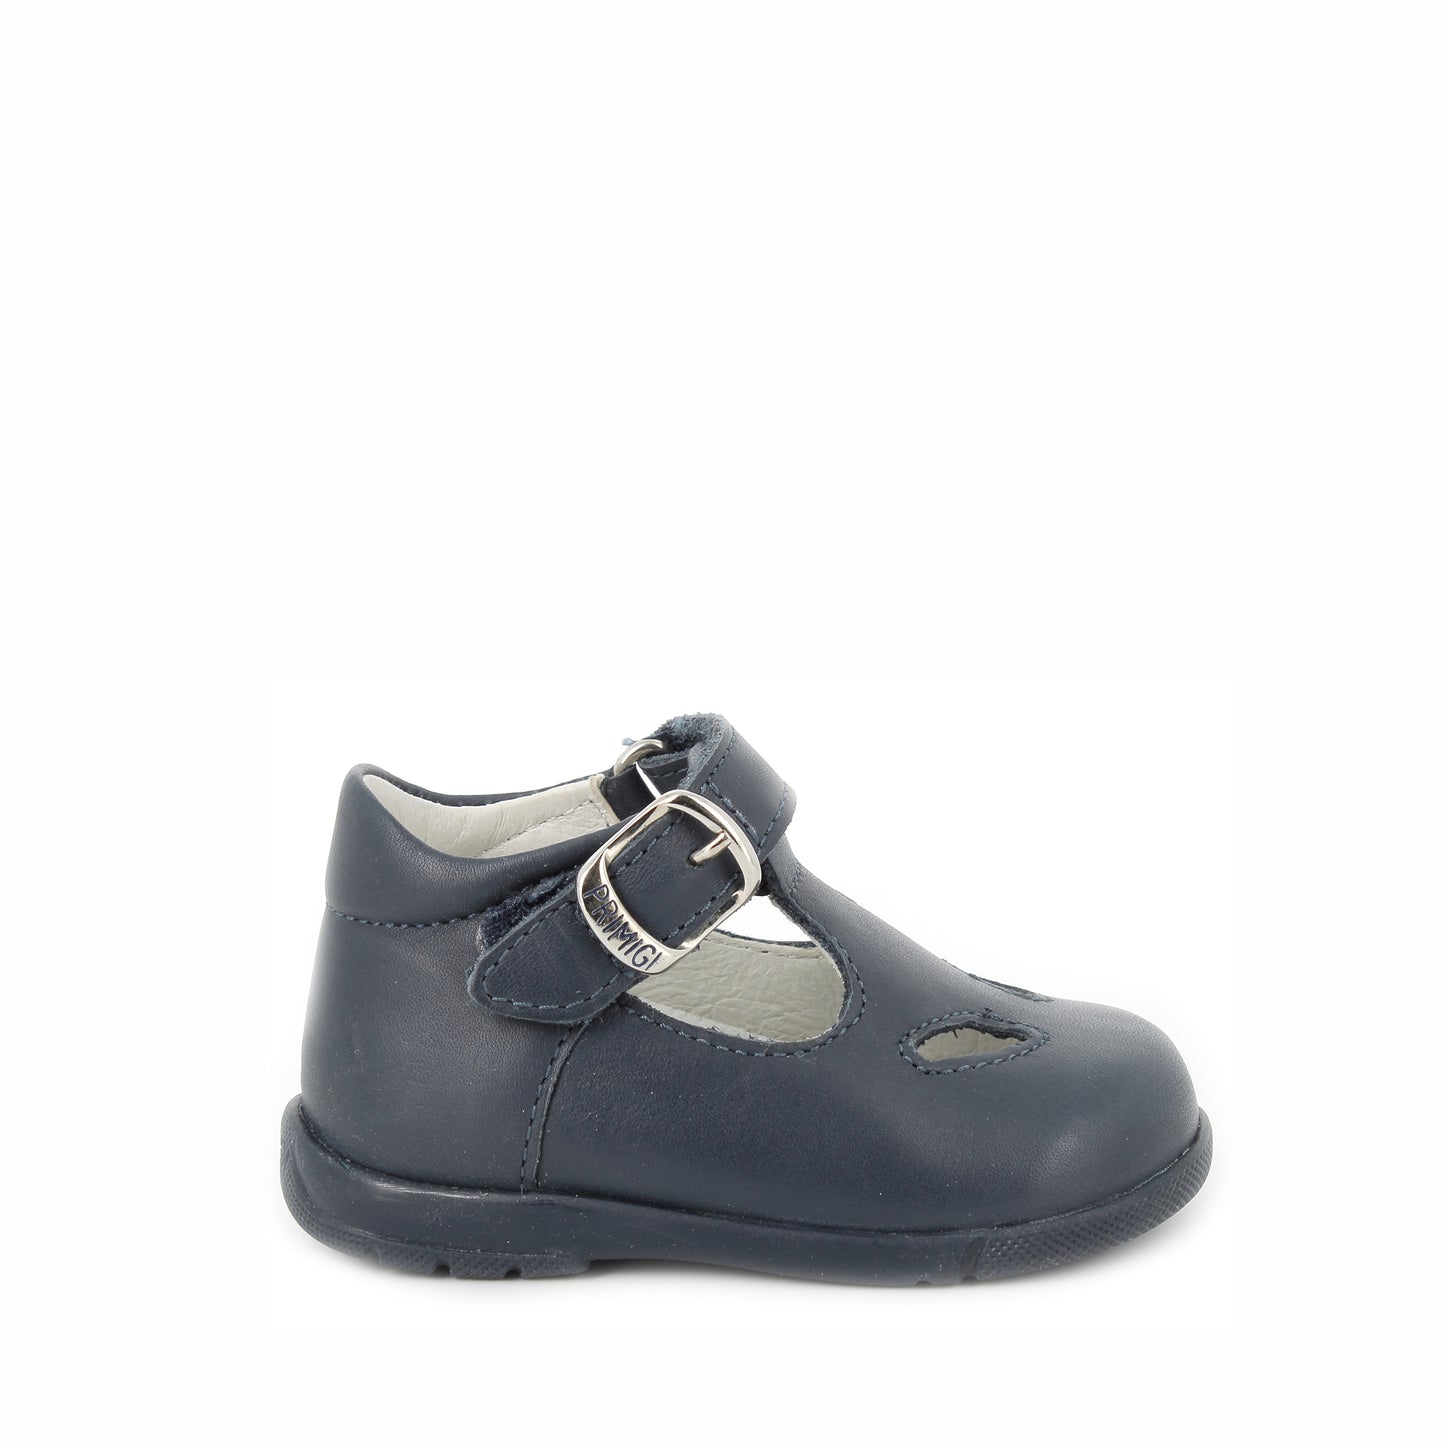 A unisex t-bar shoe by Primigi, style 3906611 Baby, in navy leather with buckle fastening. Right side view.